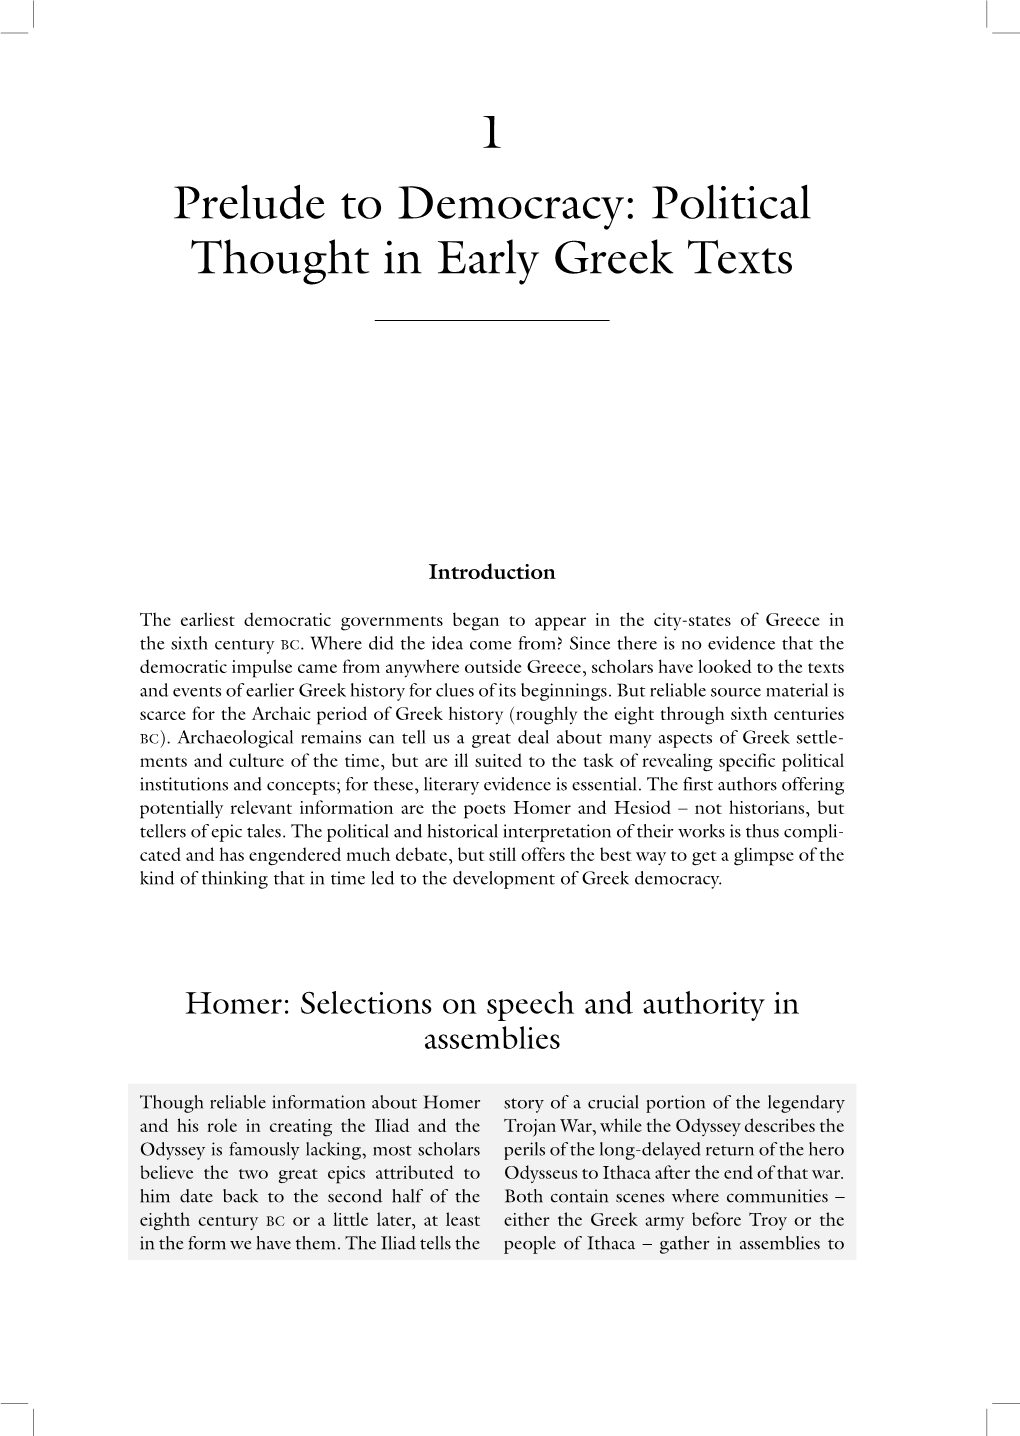 1 Prelude to Democracy: Political Thought in Early Greek Texts